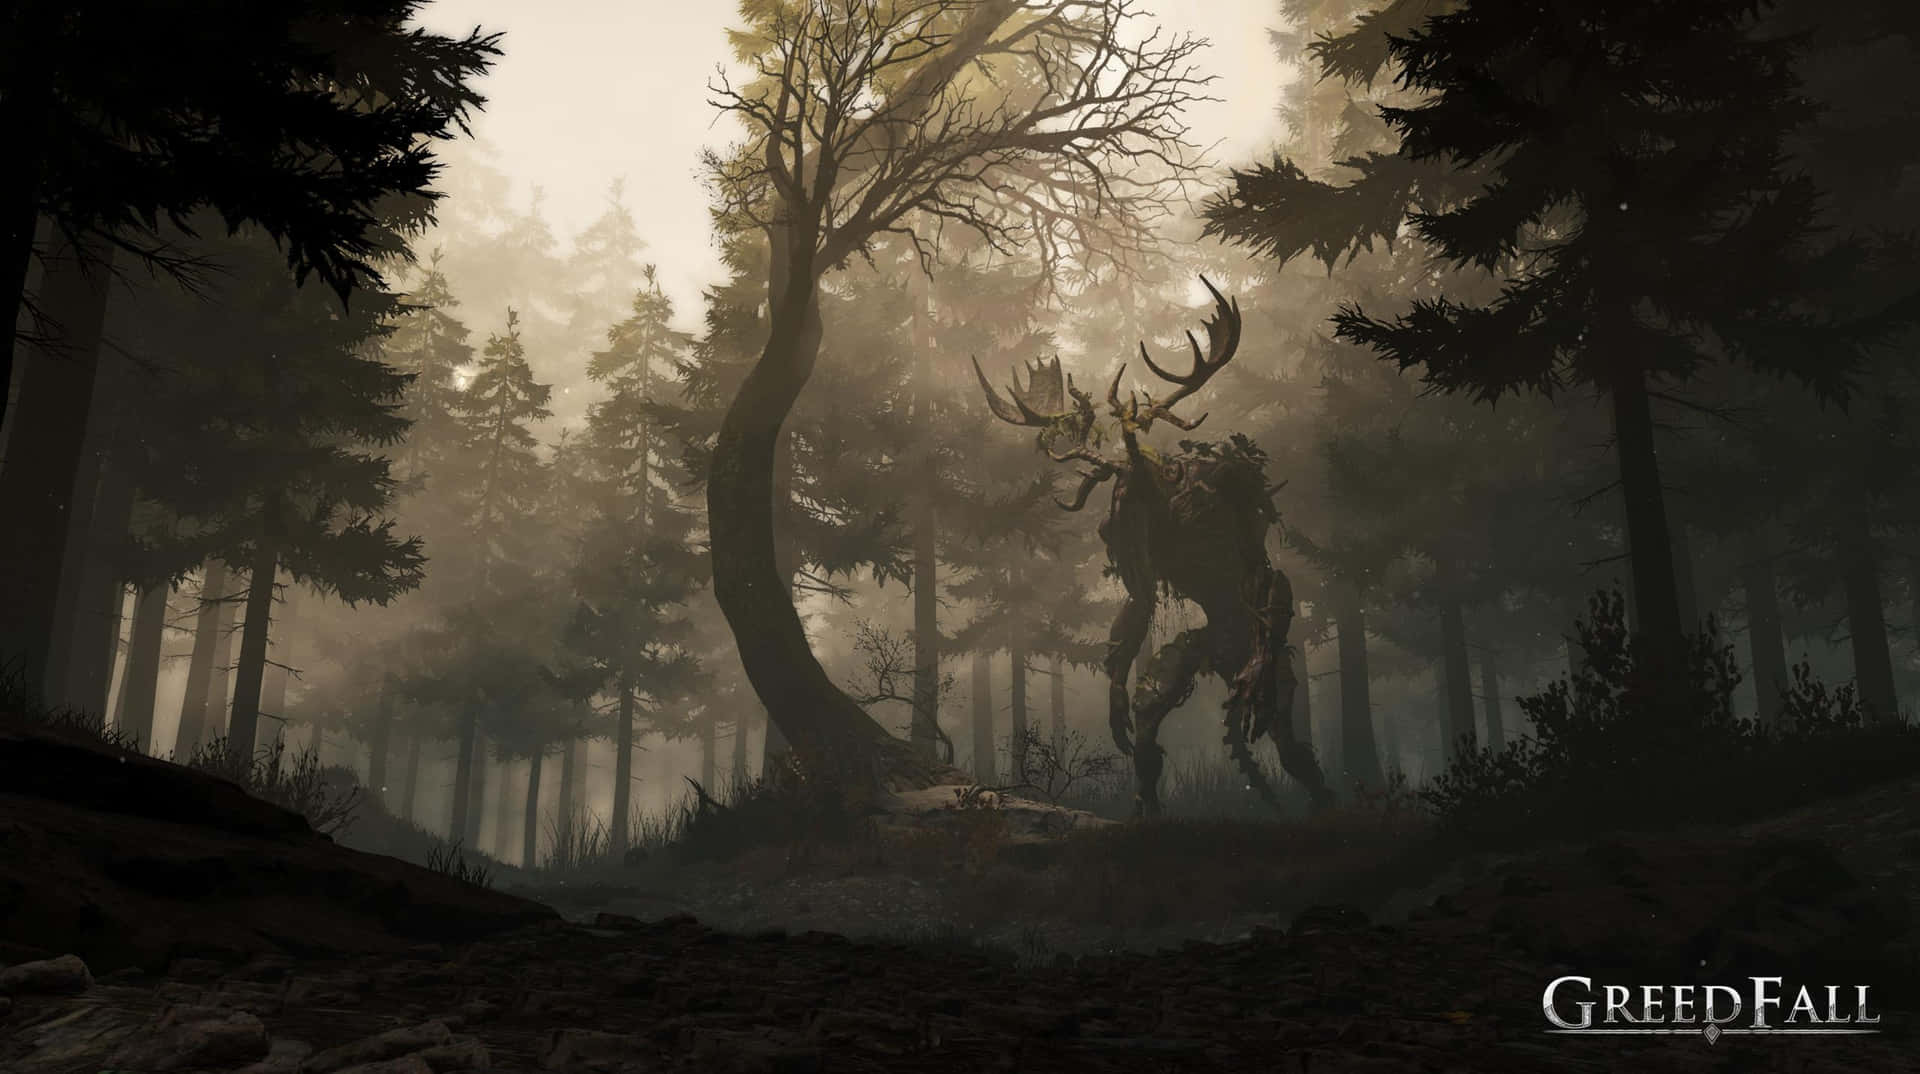 Hd Greedfall Background Mutant Deer In A Forest